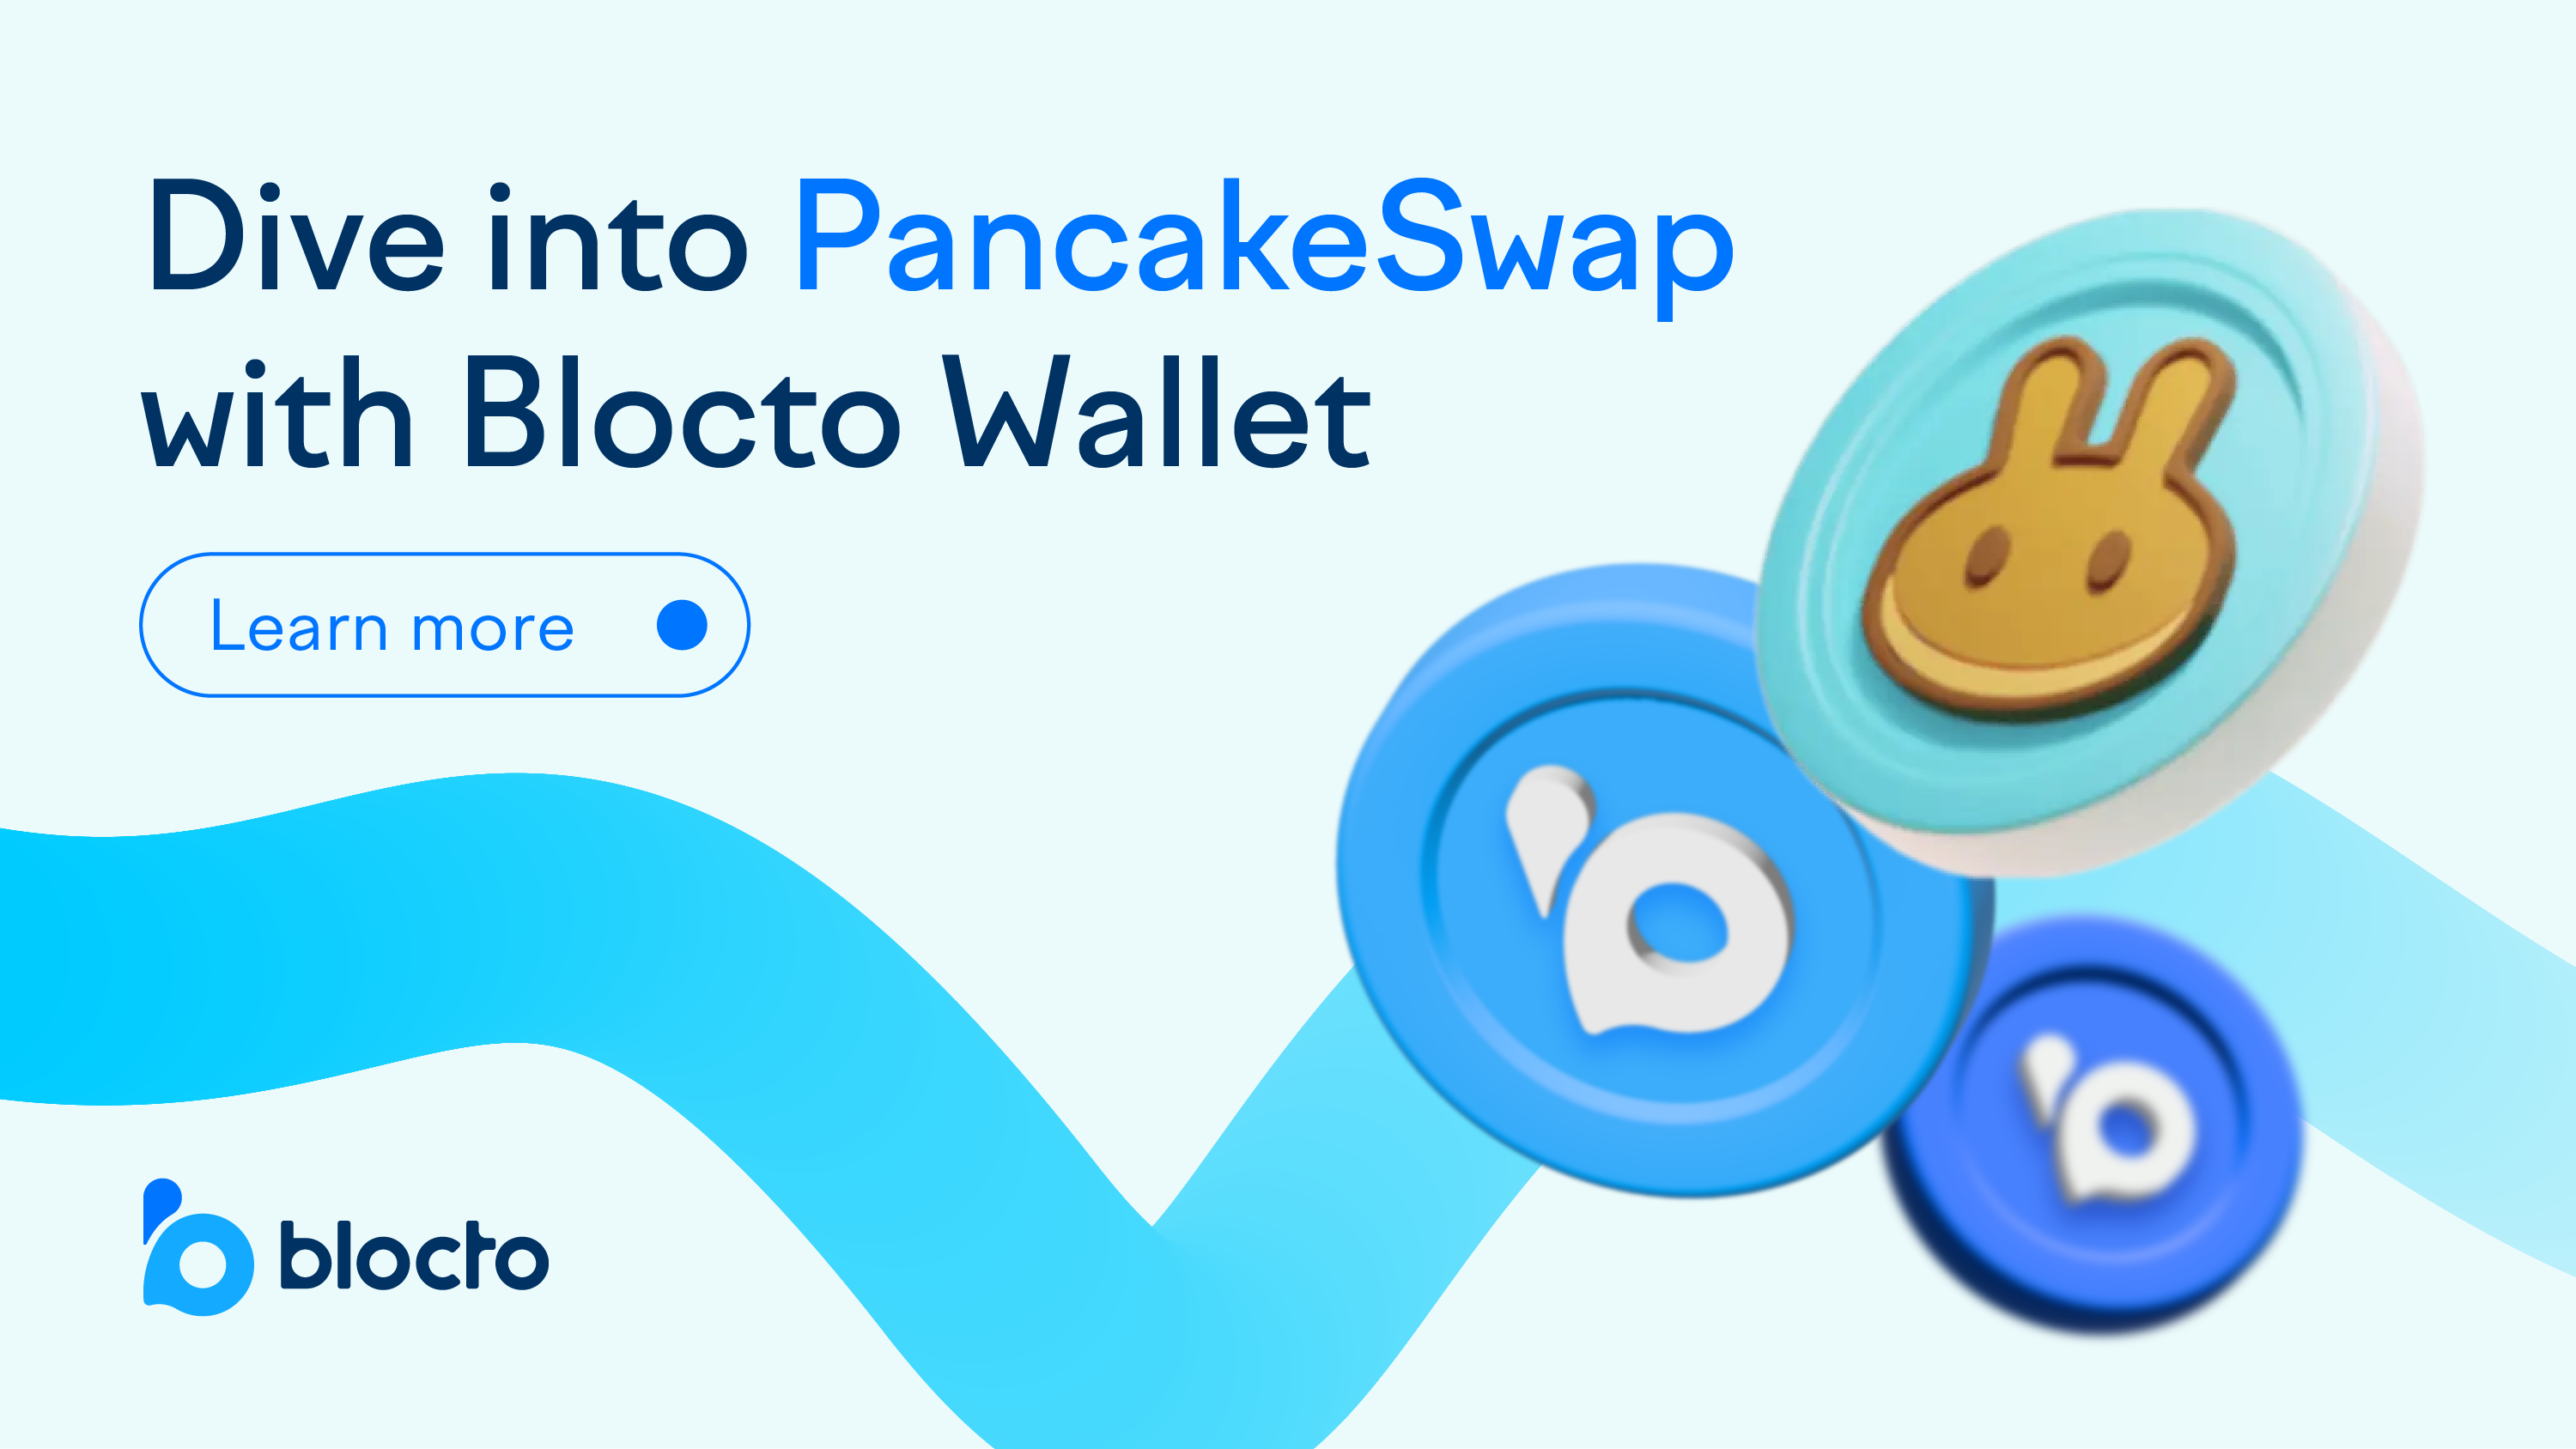 Blocto Farm and Syrup Pool are now LIVE on Pancakeswap now! You can lock your LP tokens on the Blocto Farm to earn CAKE, and stake your CAKE to earn BLT, Blocto's utility and governance token.